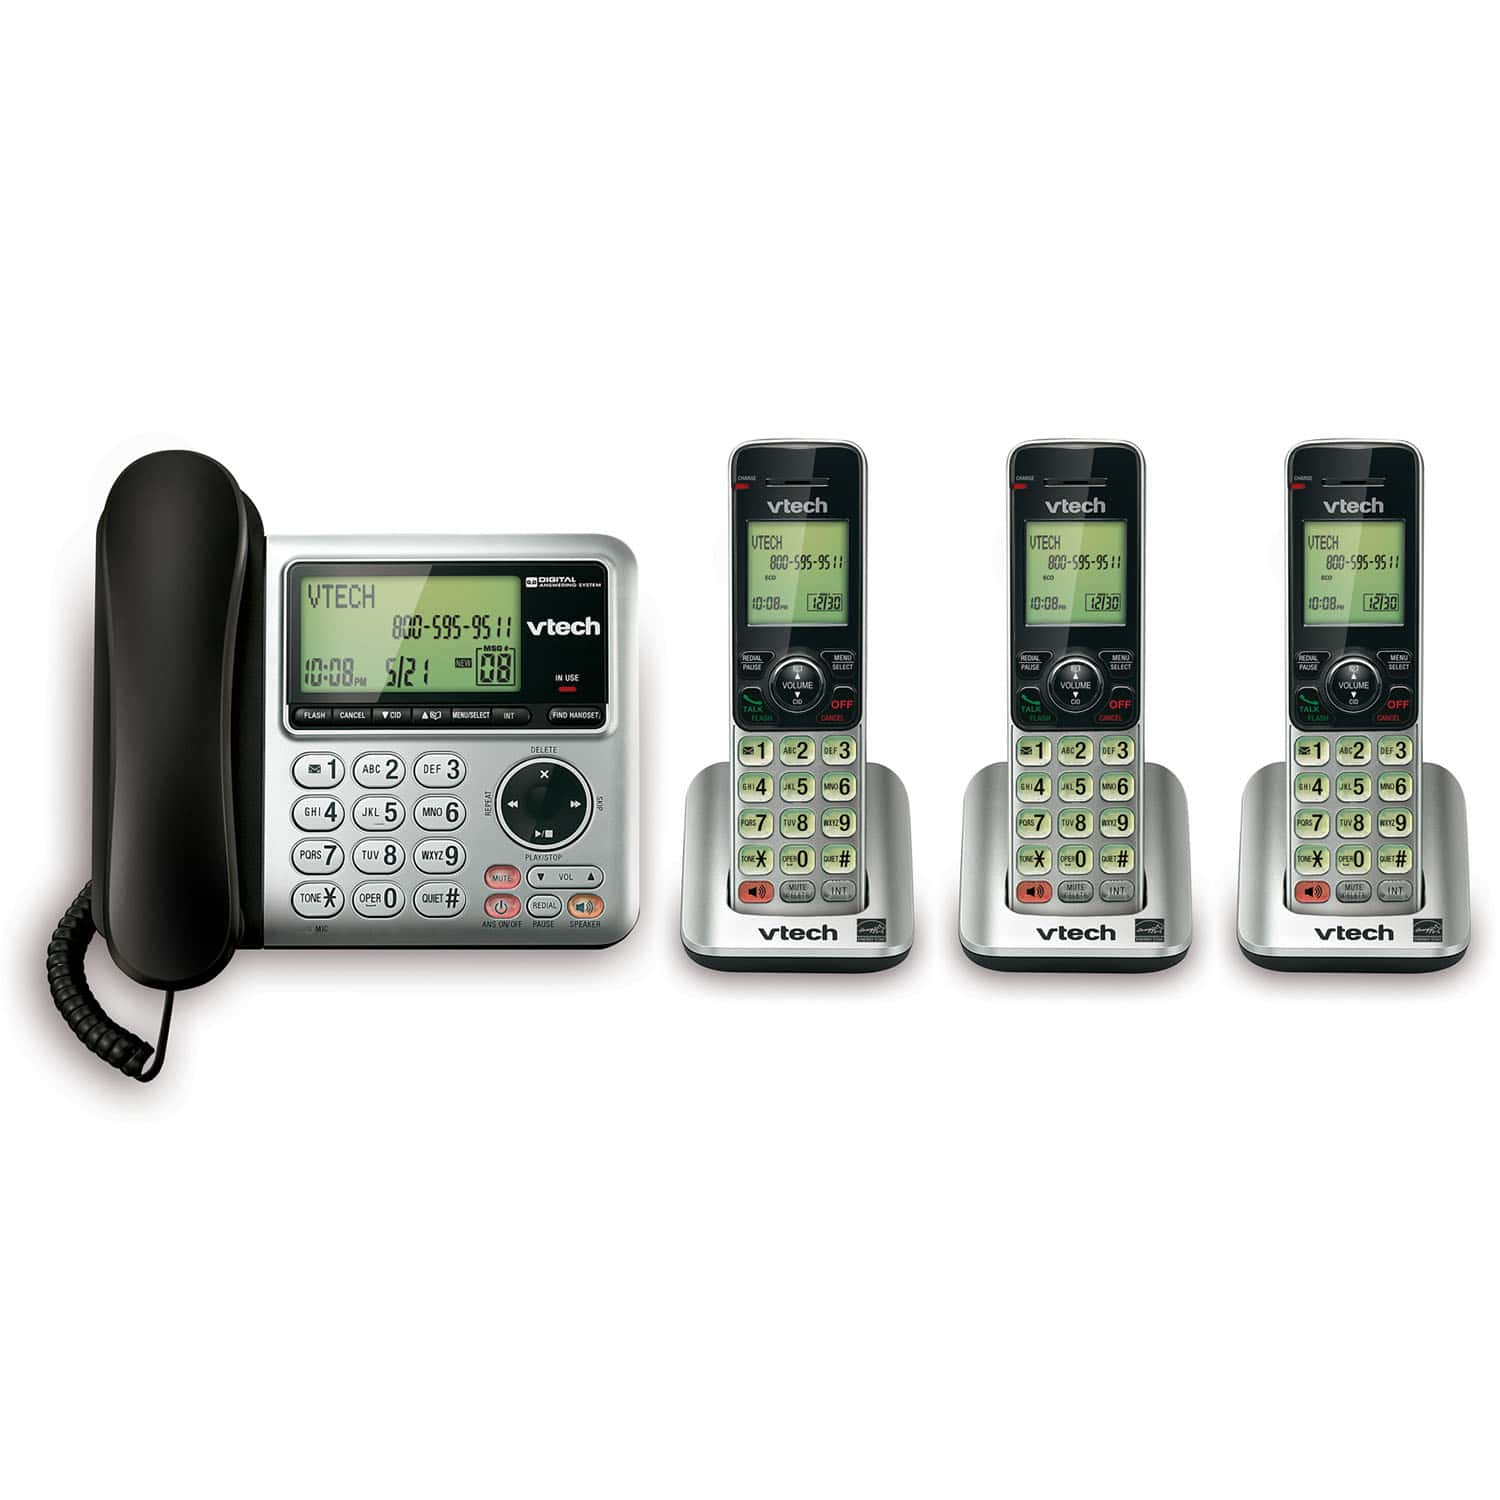 3 Handset Answering System with Caller ID/Call Waiting - view 1